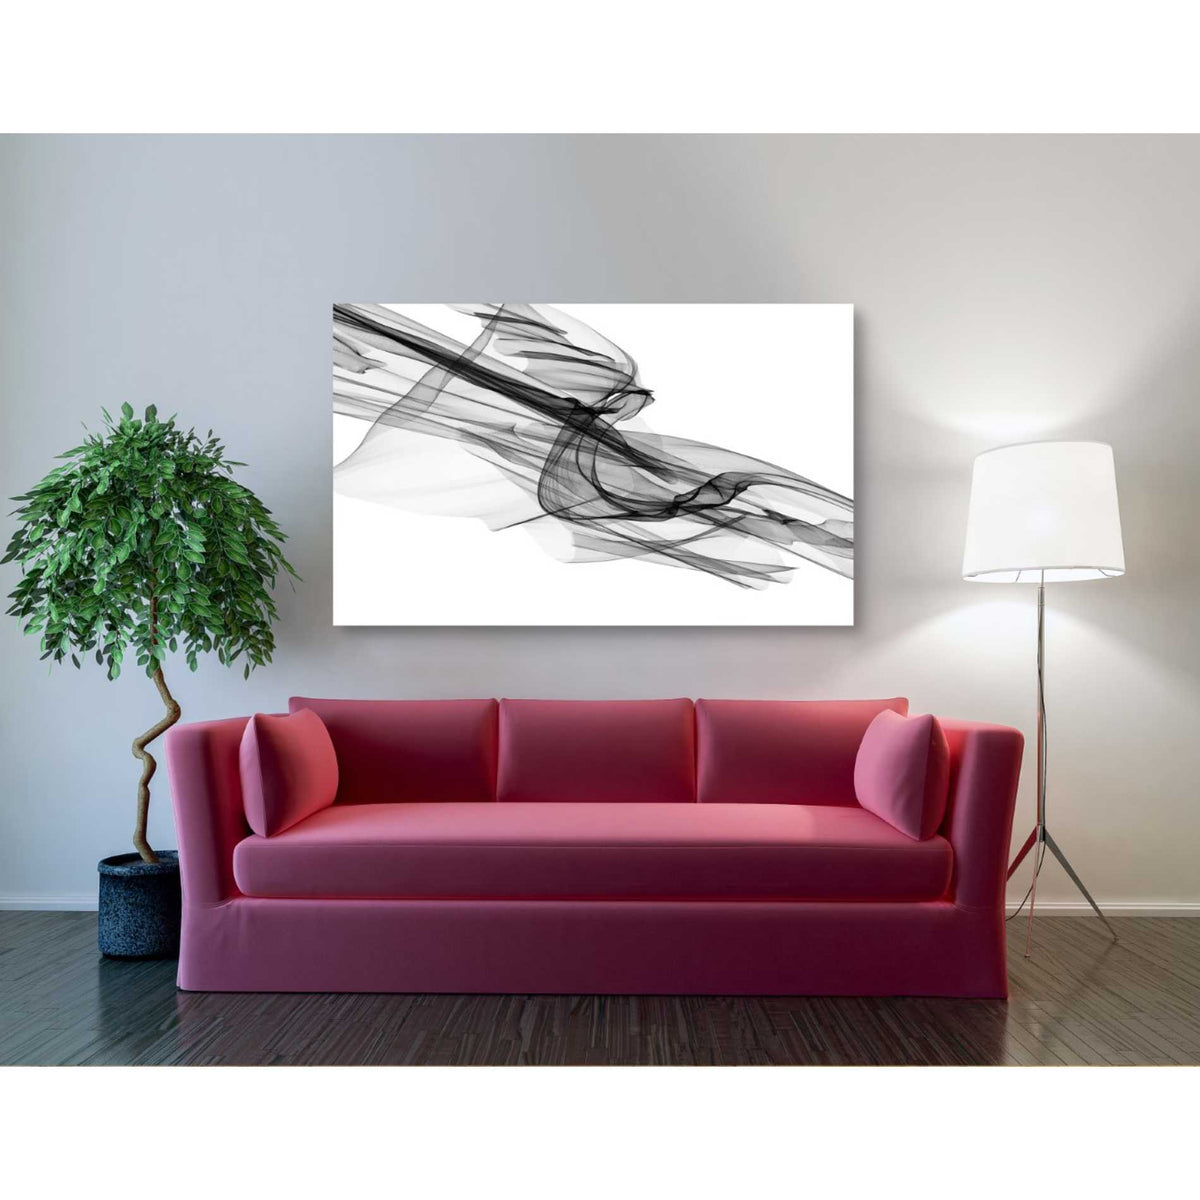 Epic Graffiti &#39;Abstract Black and White 19-48&#39; by Irena Orlov, Giclee Canvas Wall Art